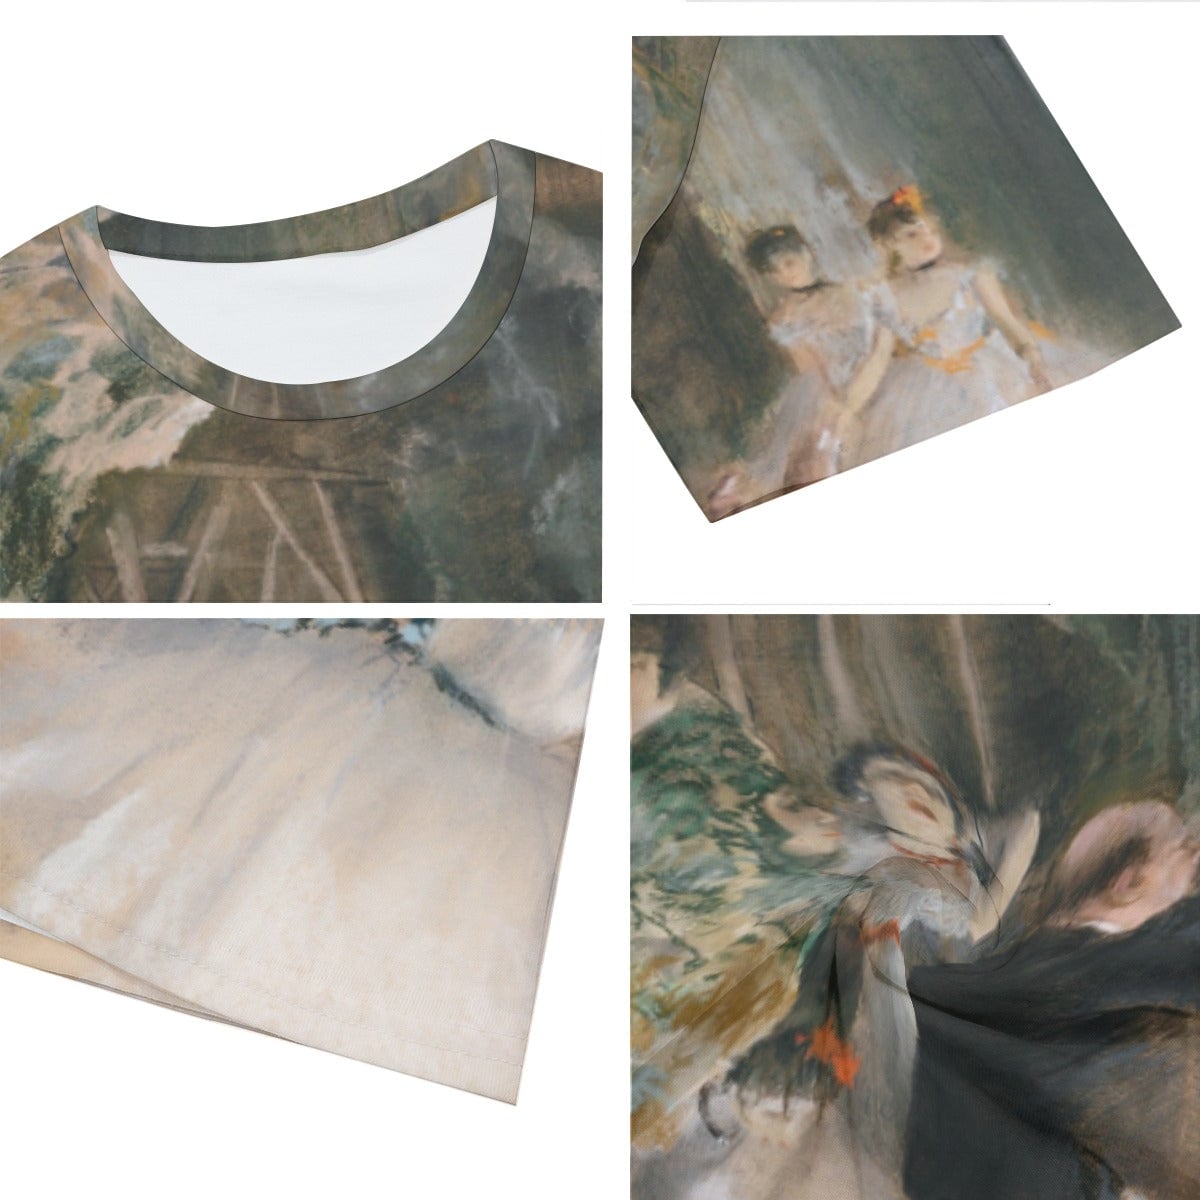 The Rehearsal Onstage Painting by Edgar Degas T-Shirt